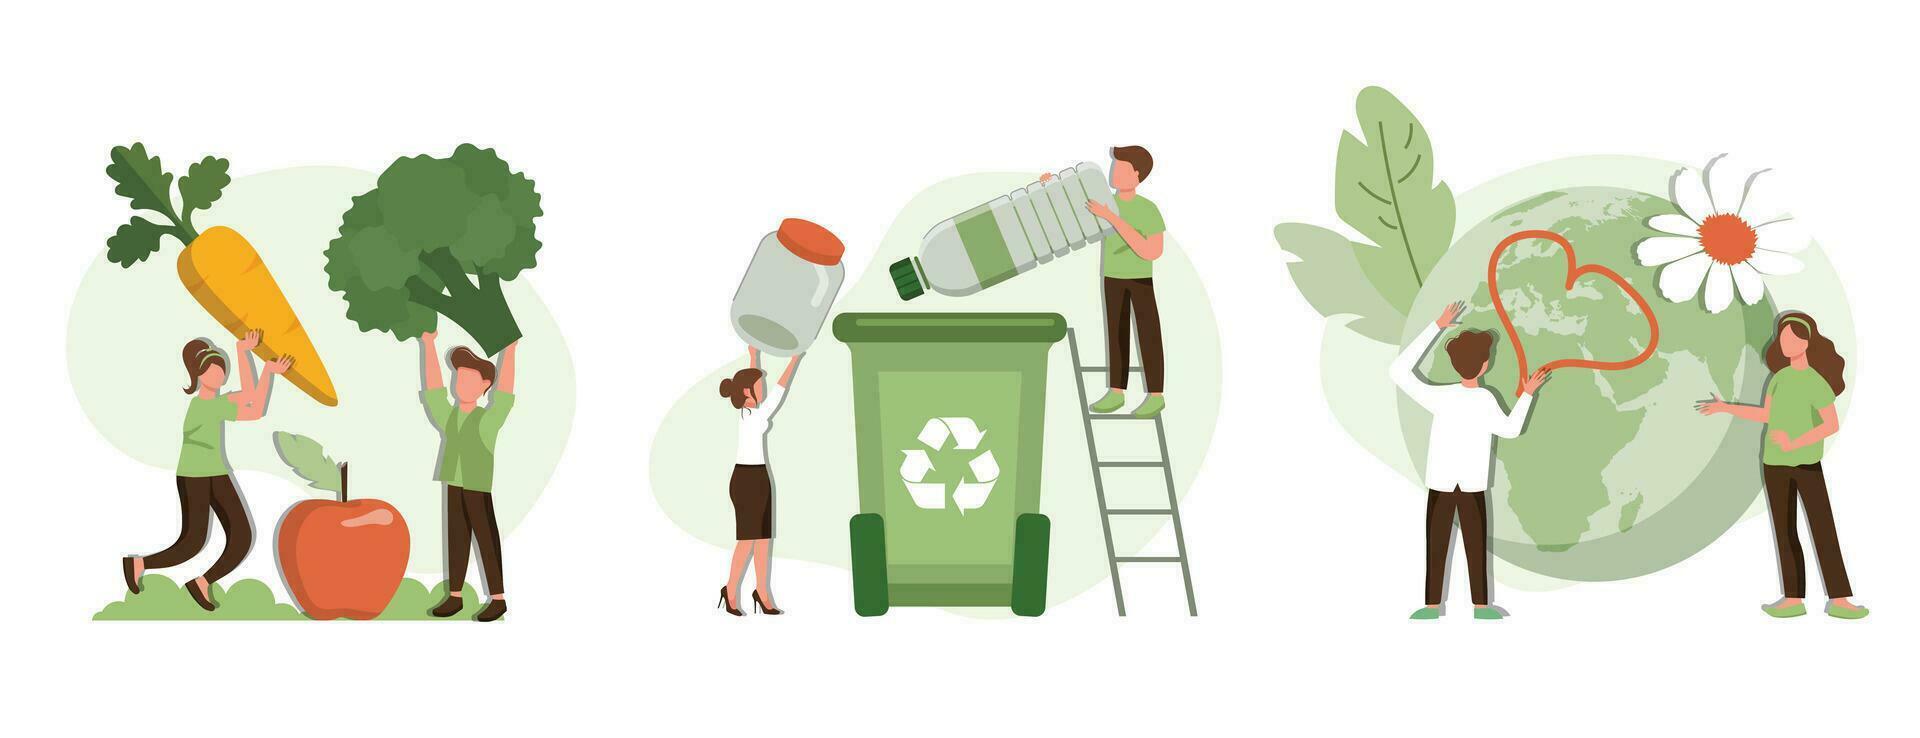 People collecting plastic trash into recycling garbage bin, trying to save planet earth and following vegan diet. Sustainable lifestyle set. Flat cartoon vector illustration and icons set.